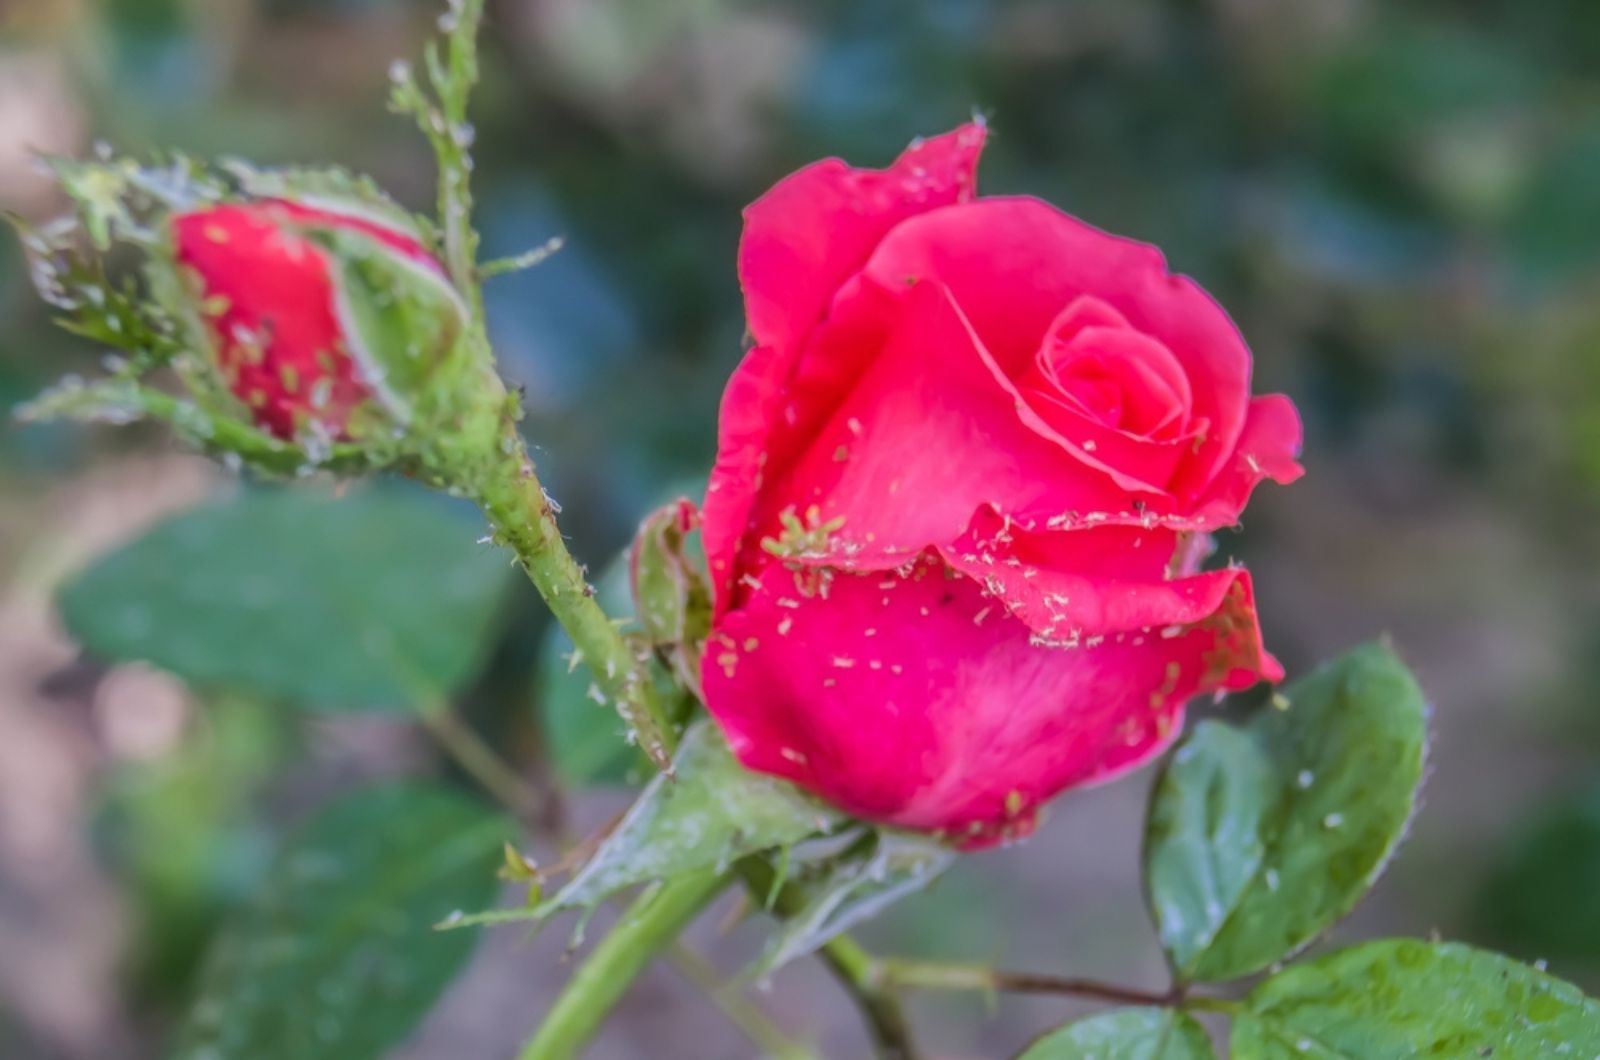 Aphids on rose flowers in nature